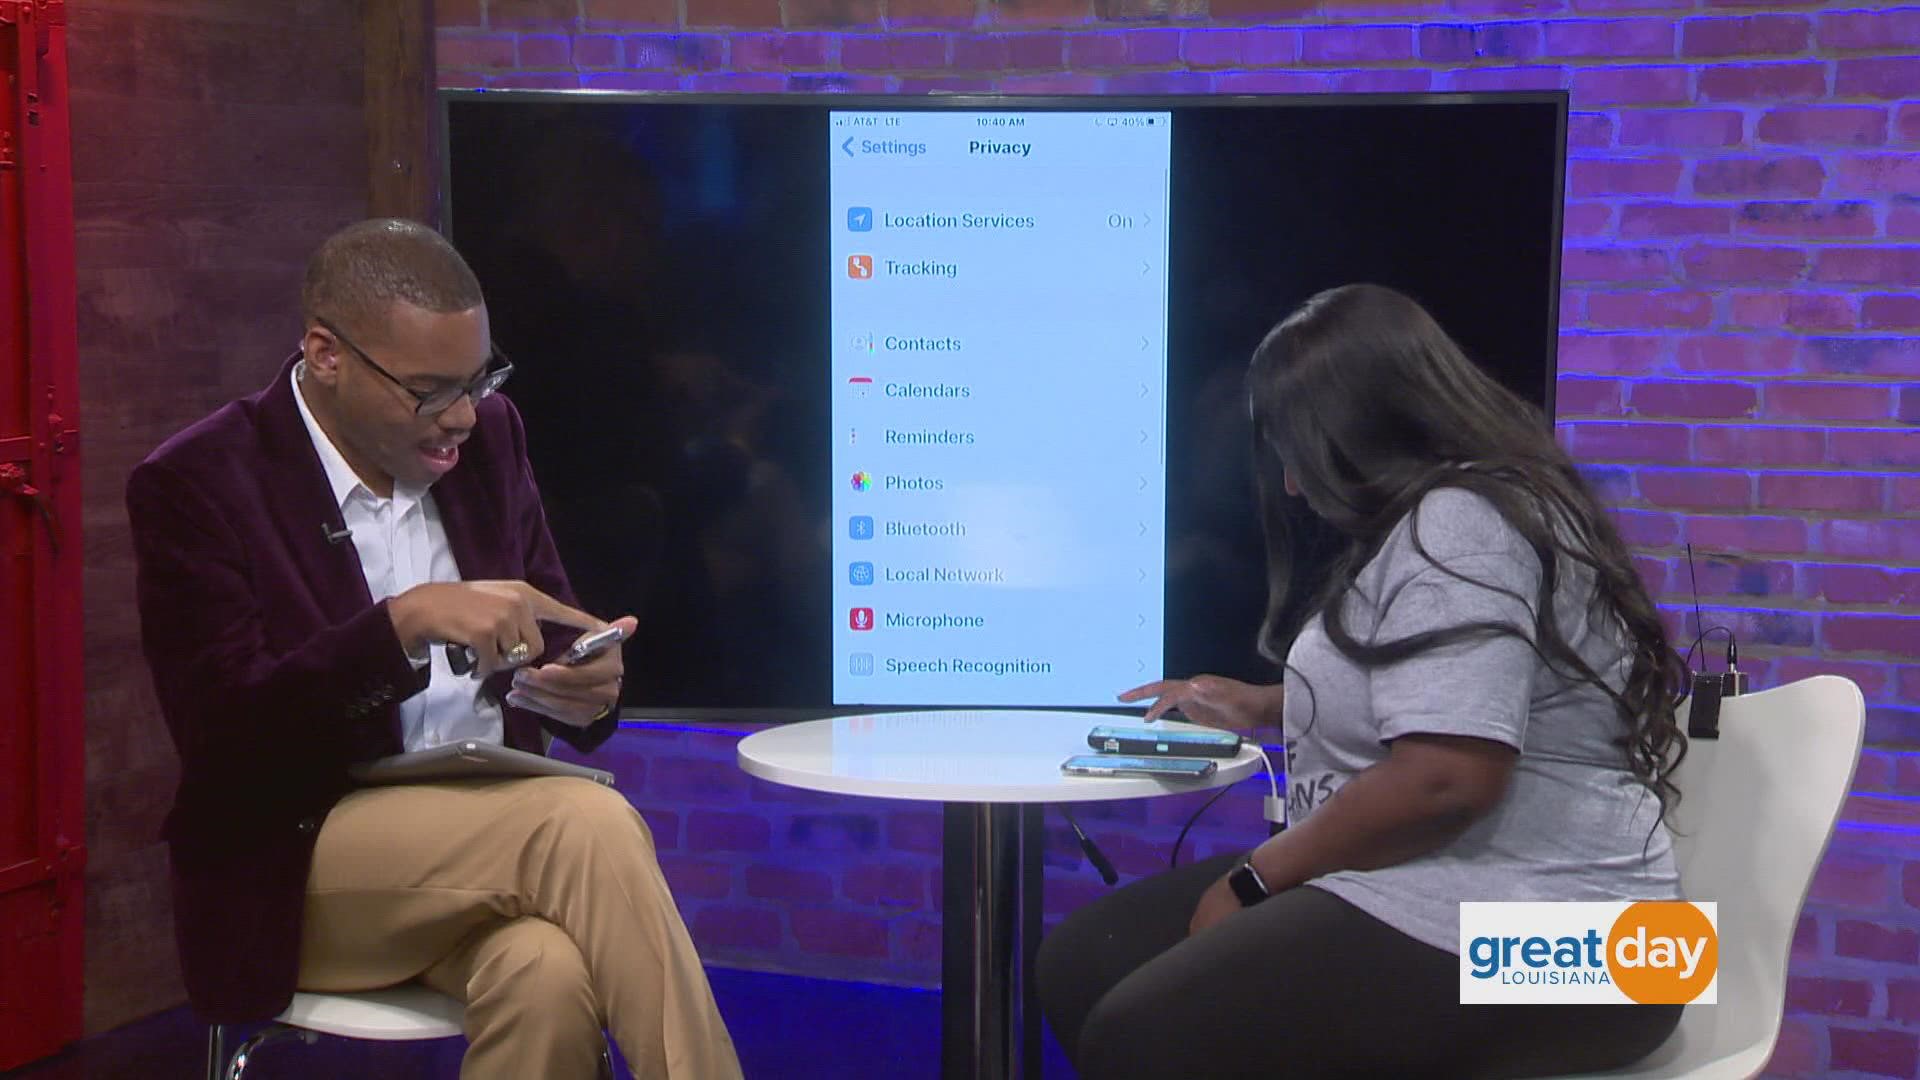 A tech expert shared tips on how to change the settings on your iPhone to help with protecting personal information.